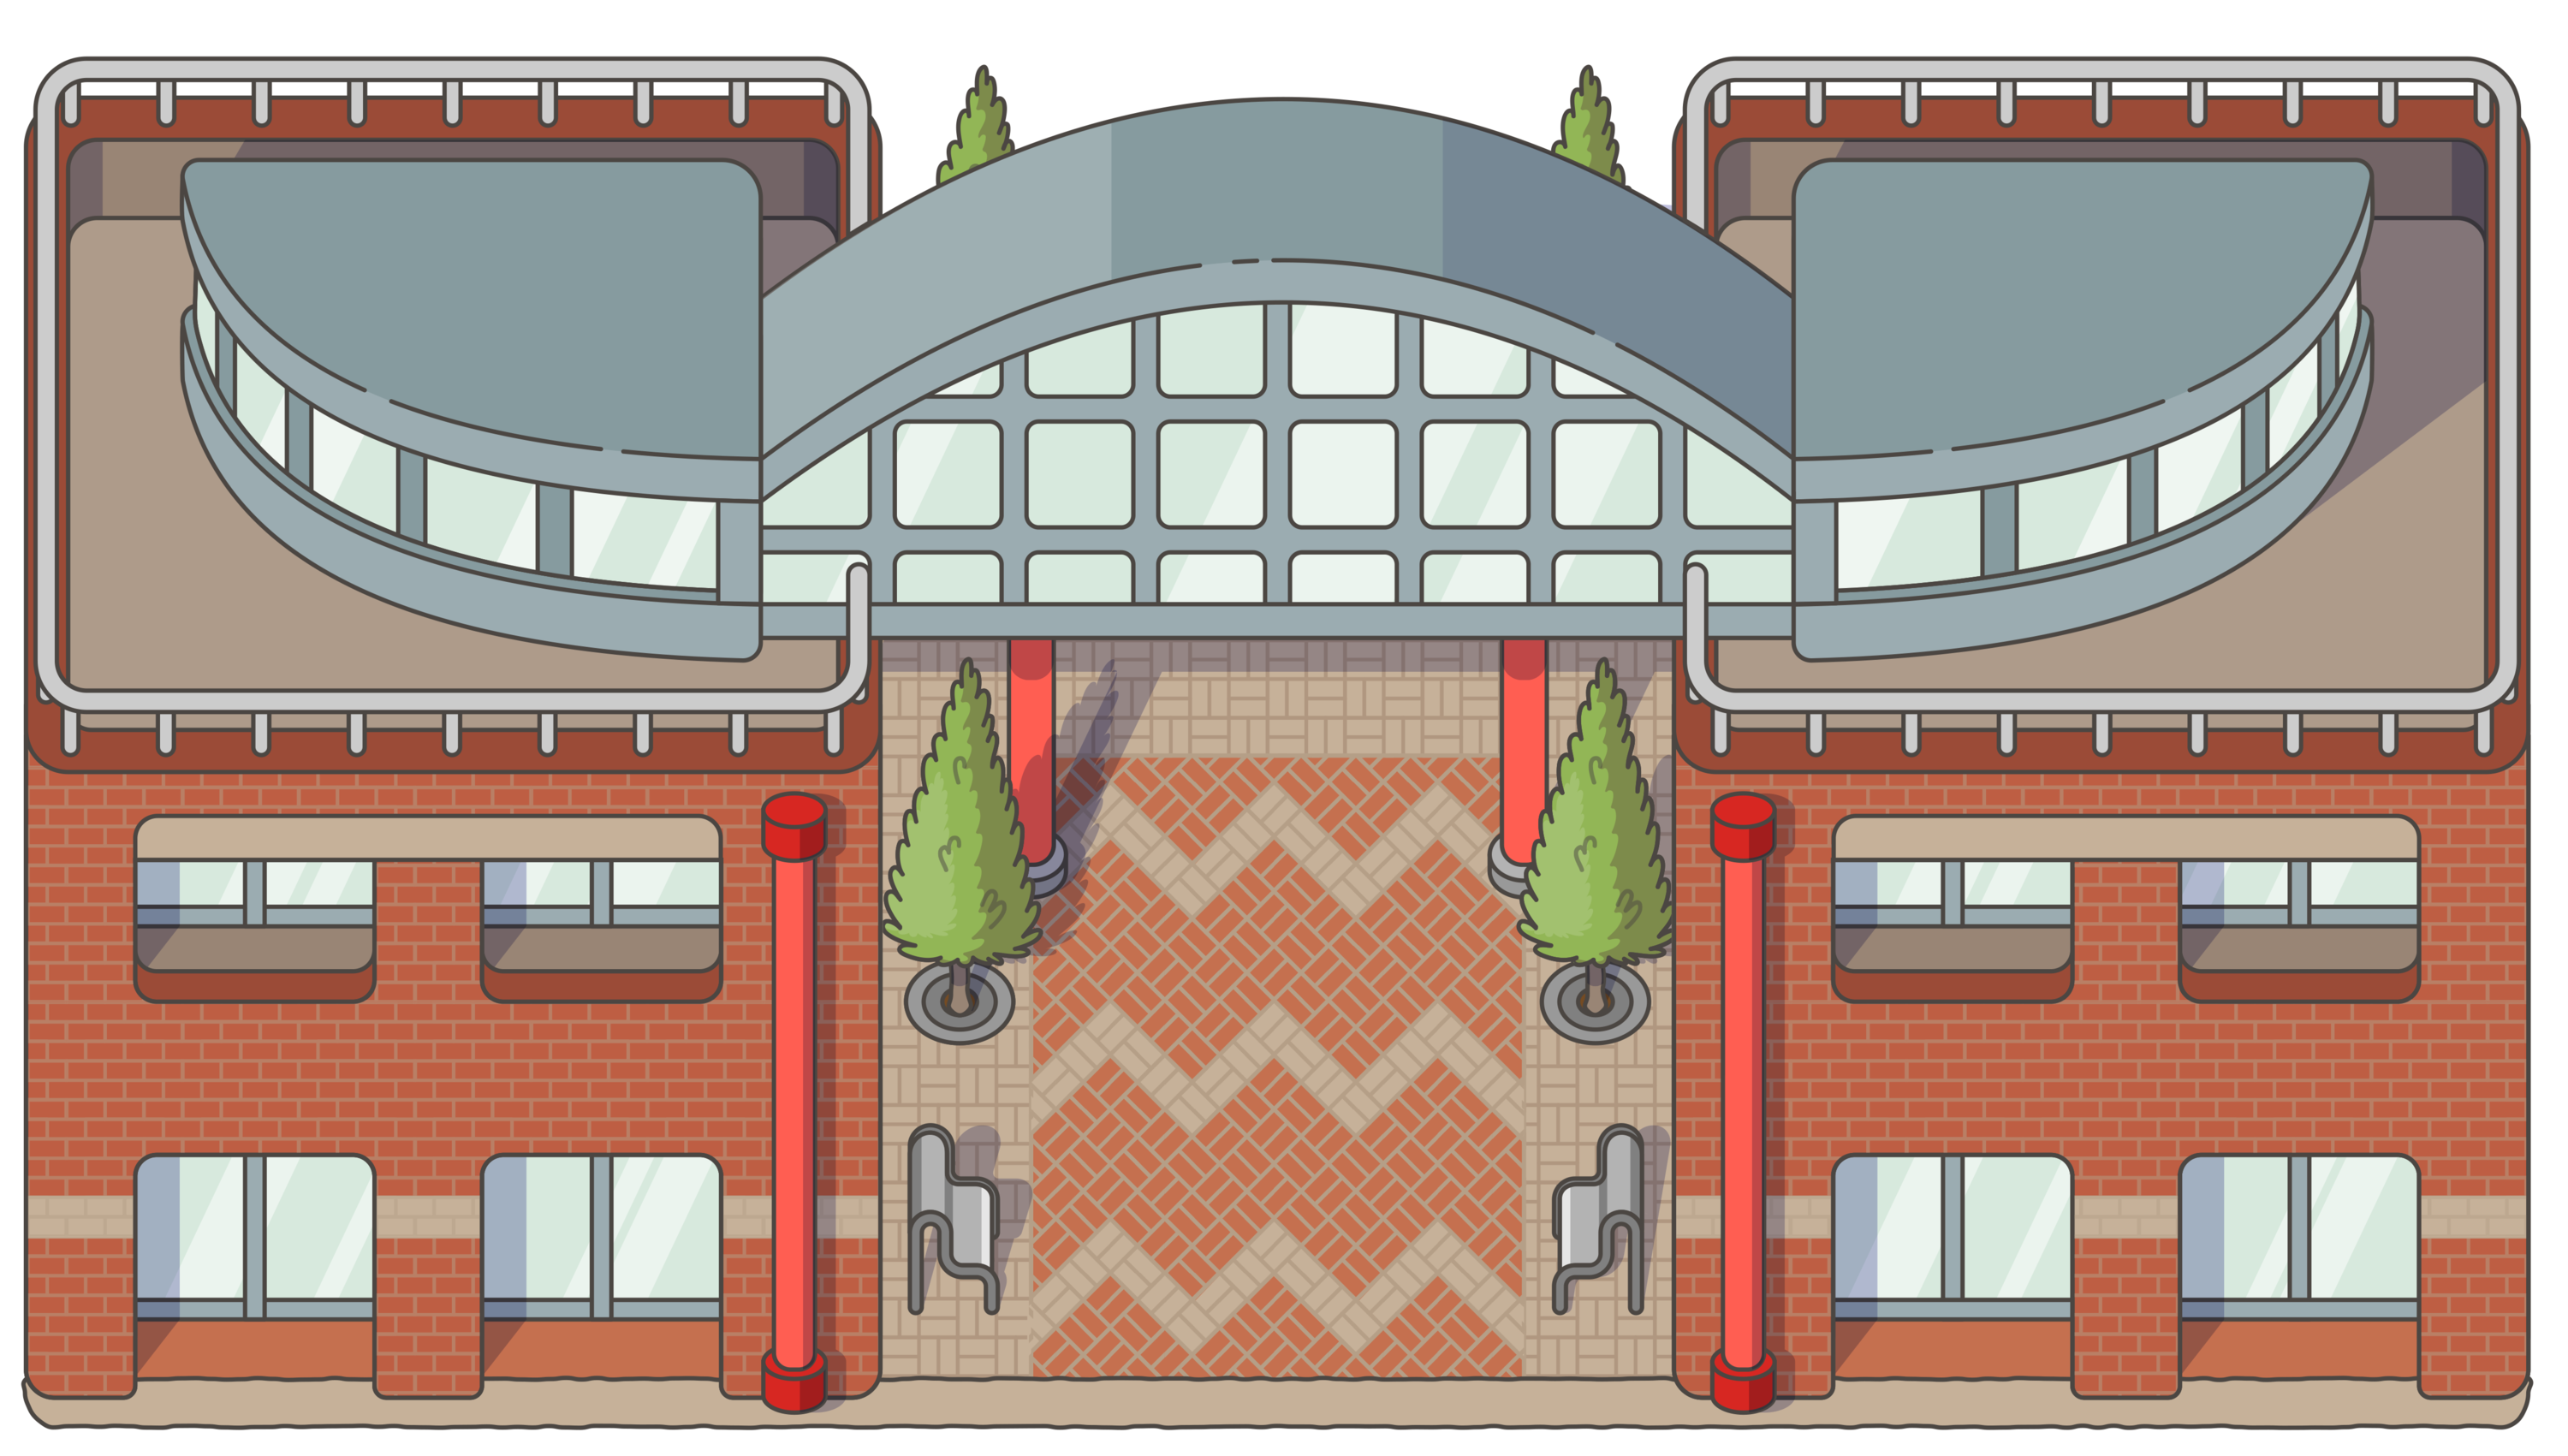 Animated version of a Swinburne building with a quad area in the middle